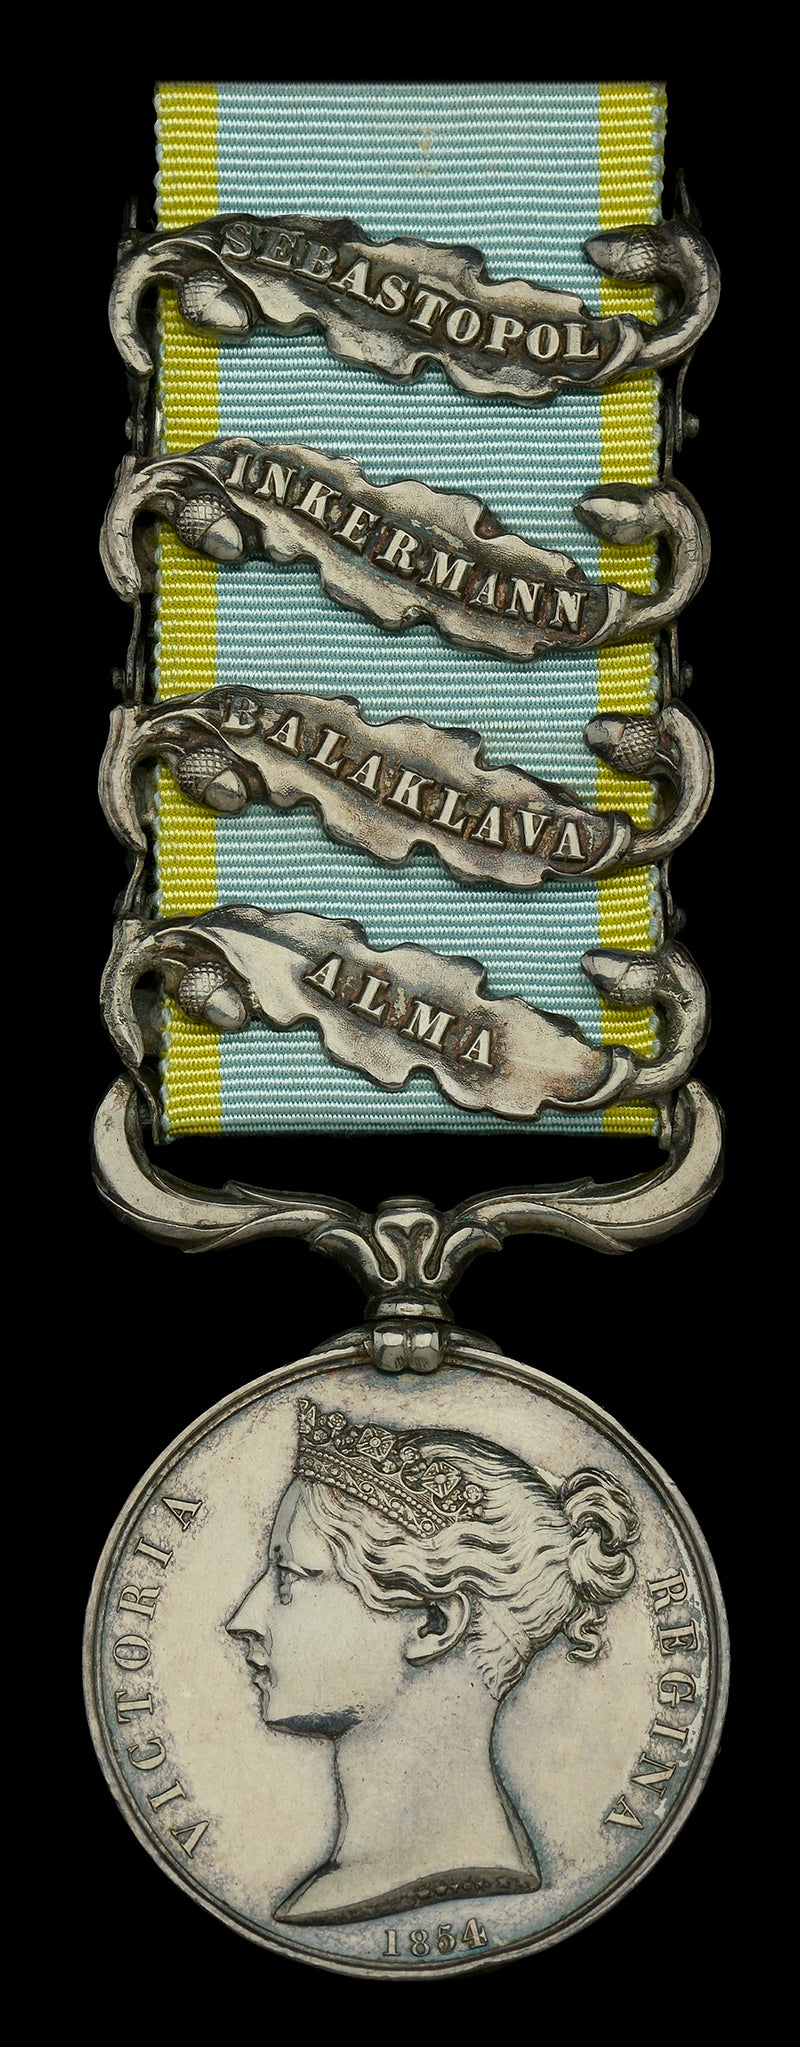 Single: Crimea medal to Private Squire Baldwin, 3rd Battalion, Grenadier Guards, who was killed in action at the battle of Inkermann